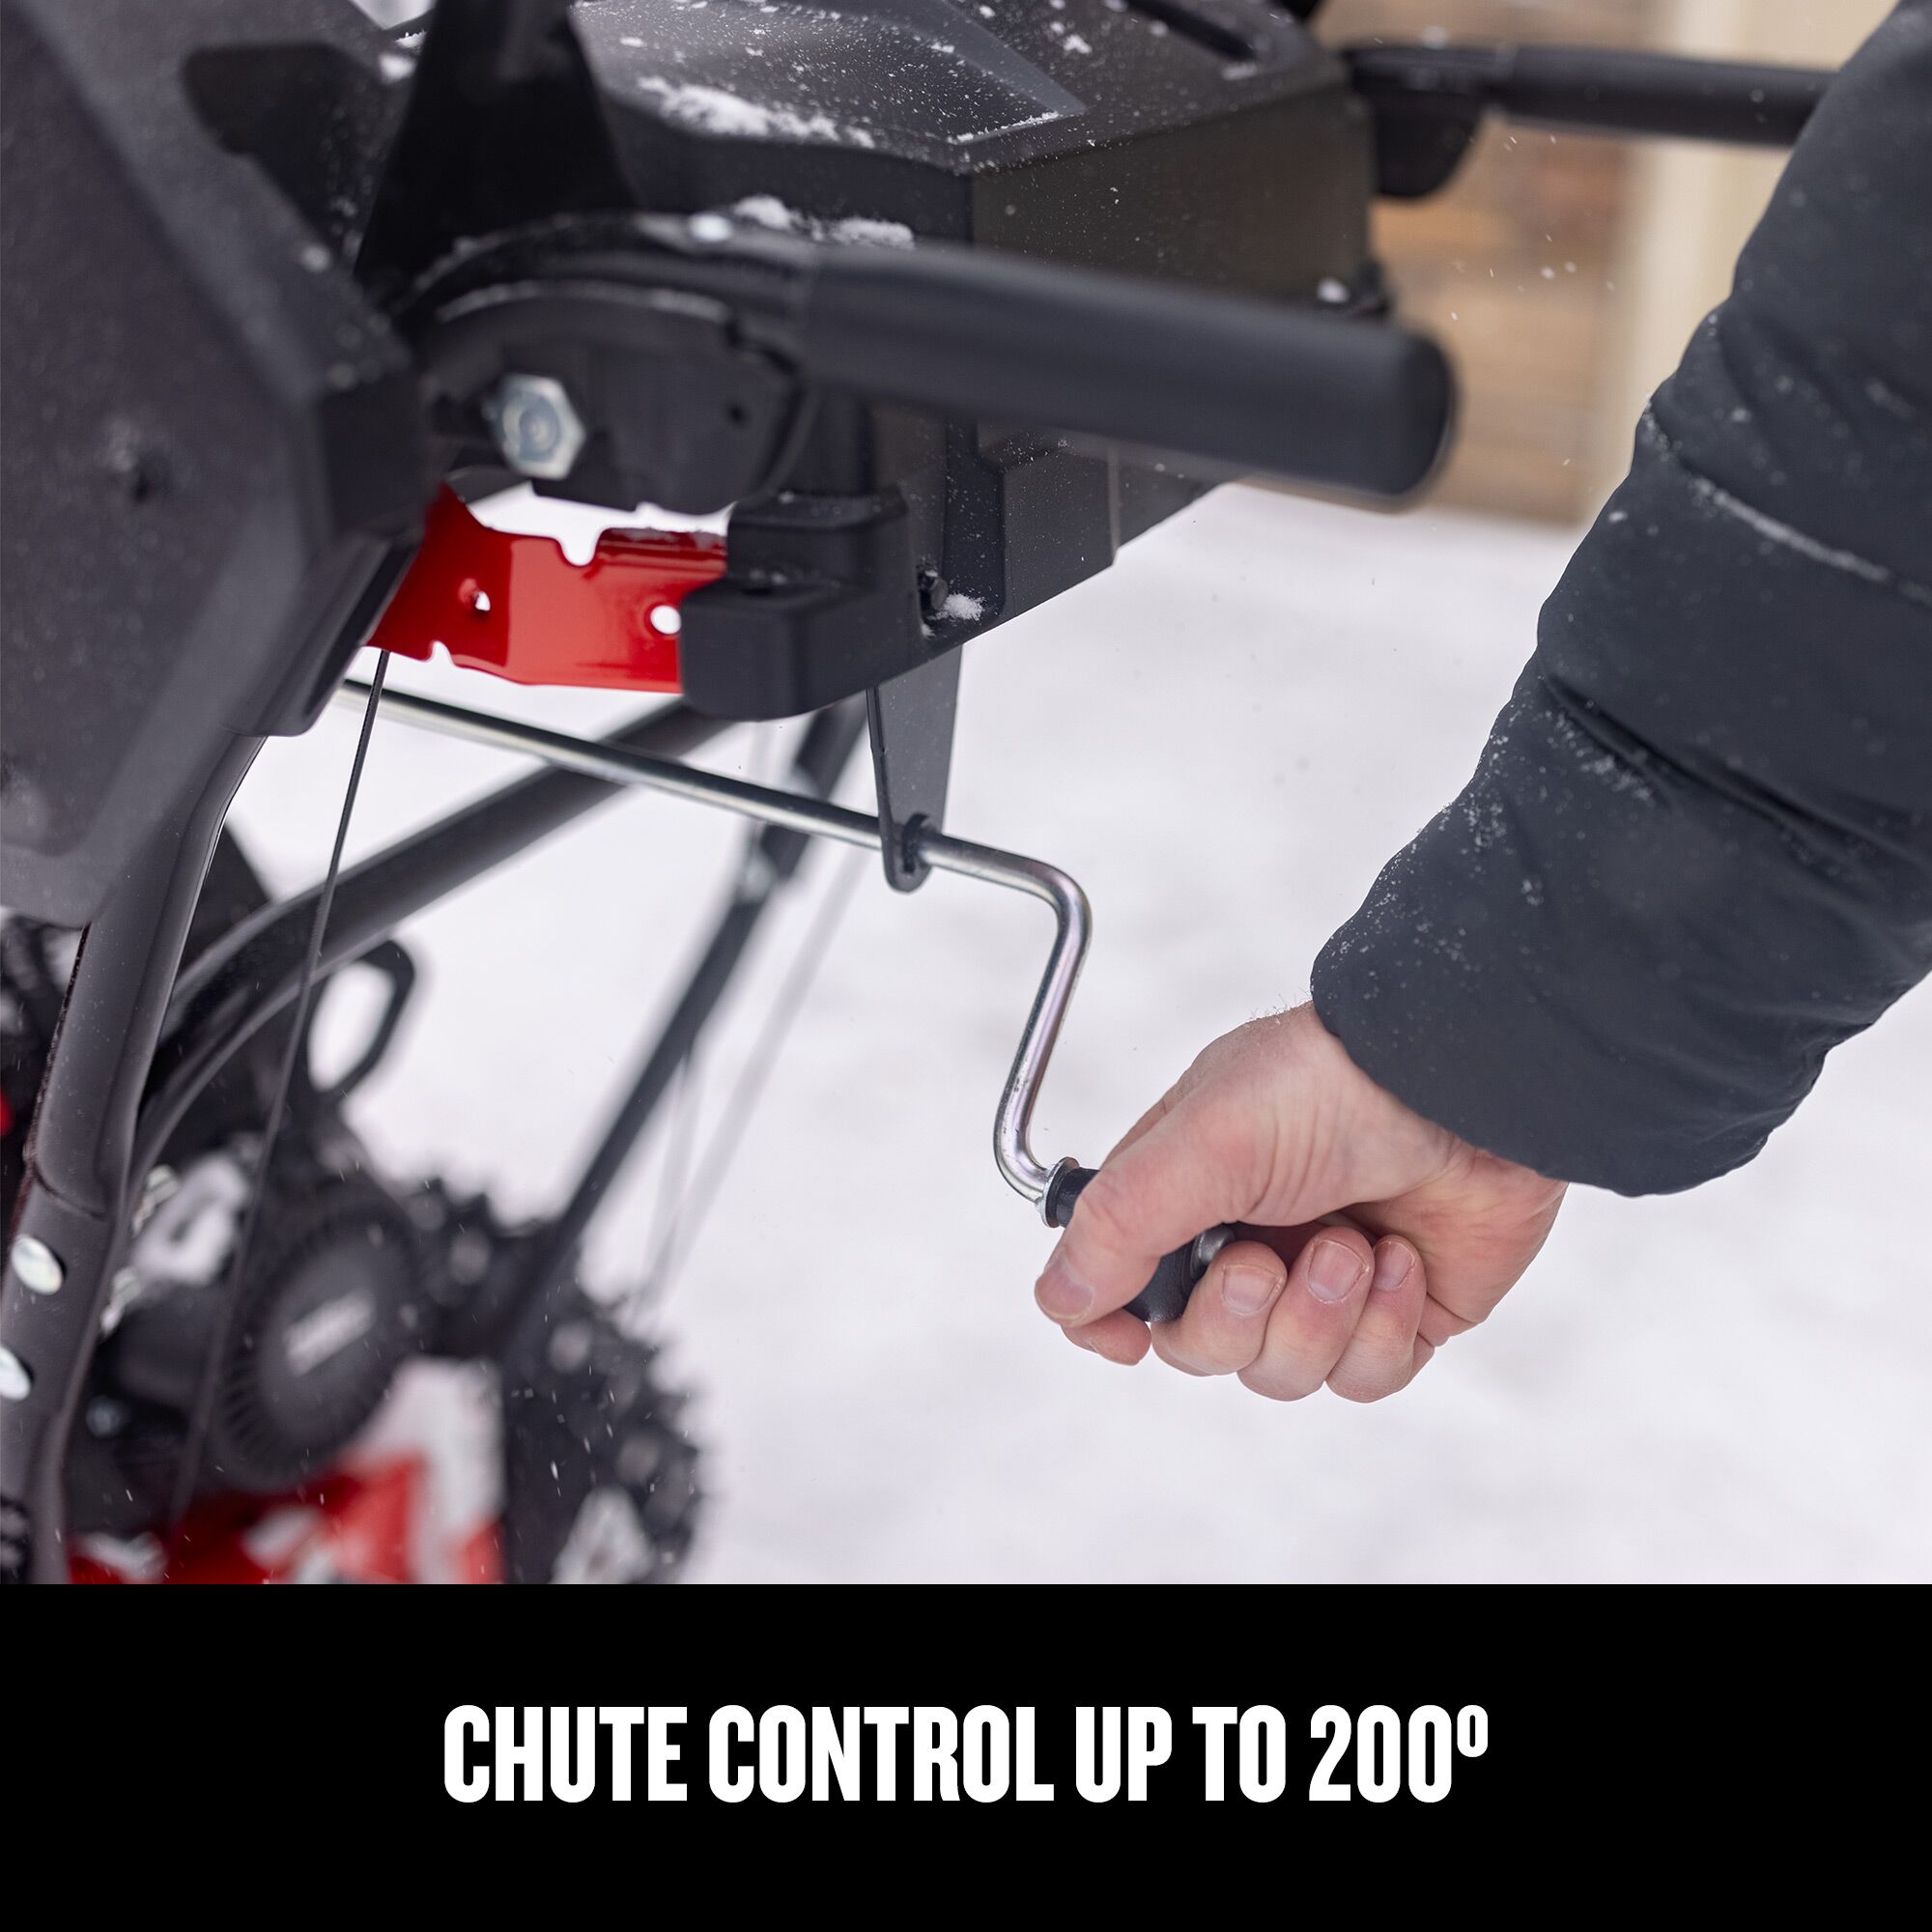 CRAFTSMAN 24 in 2-Stage Gas Snow Blower focused in on chute control